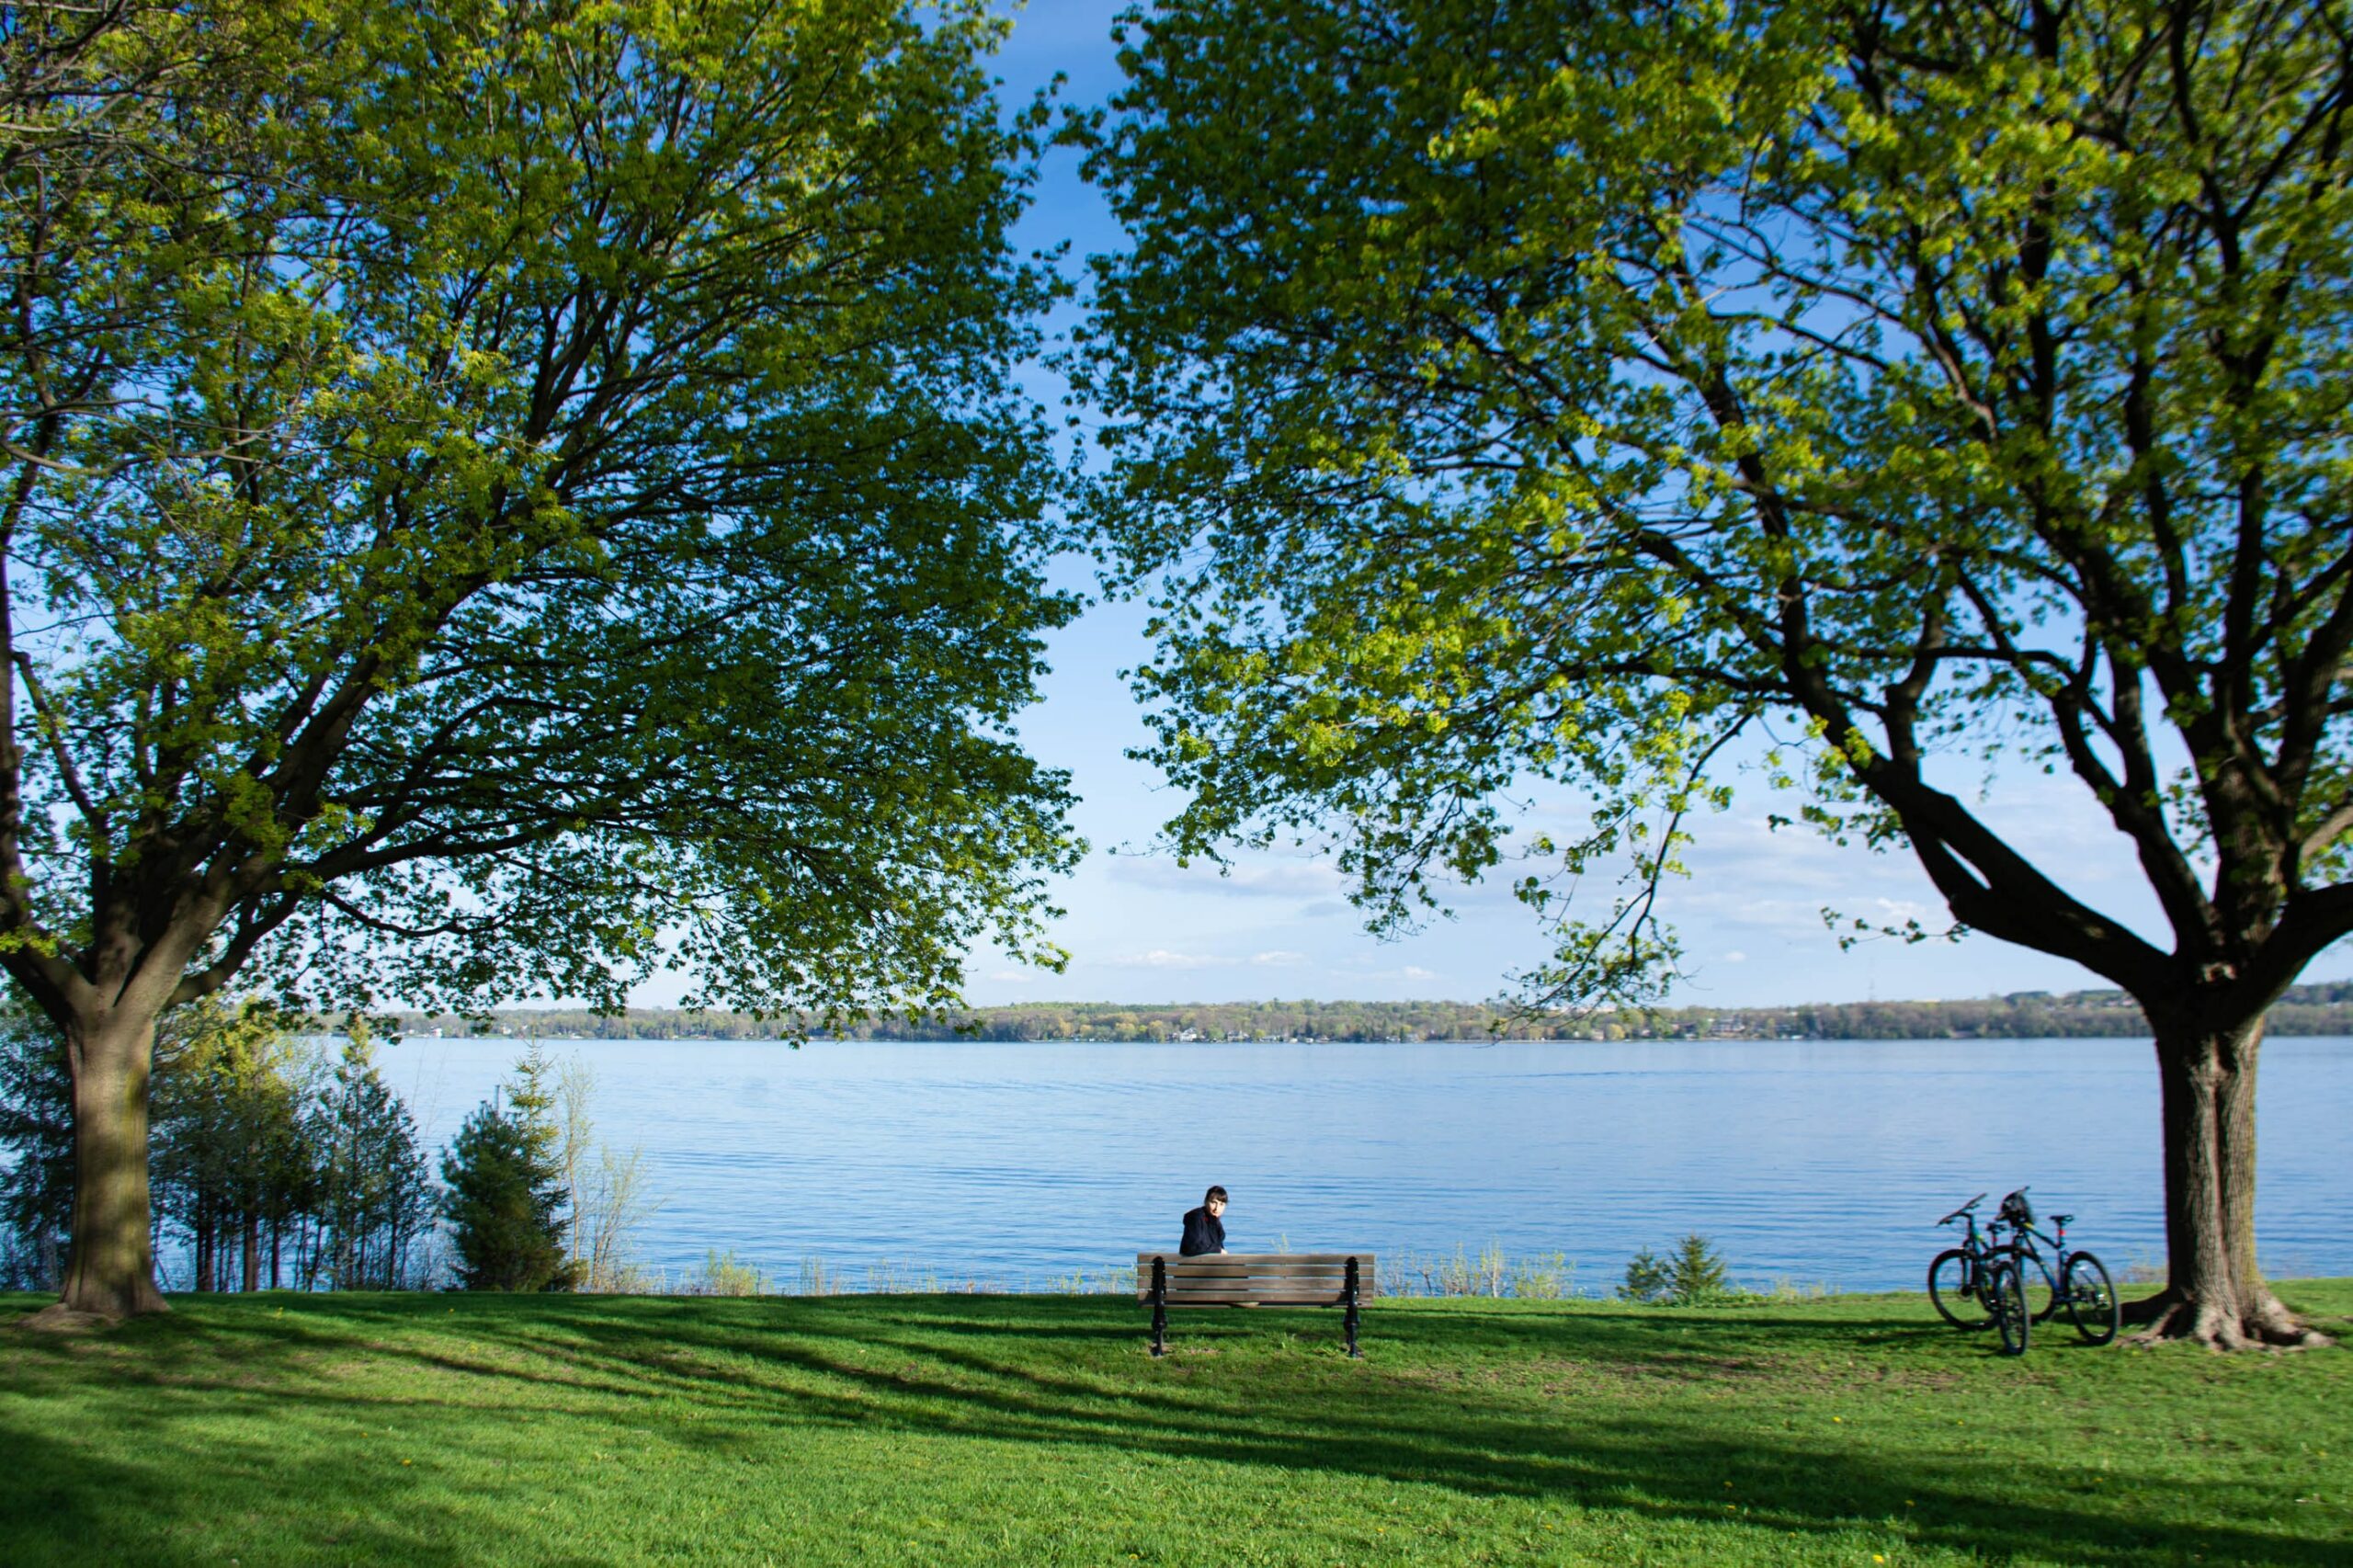 New Report: Who Will Take Care of Lake Simcoe?